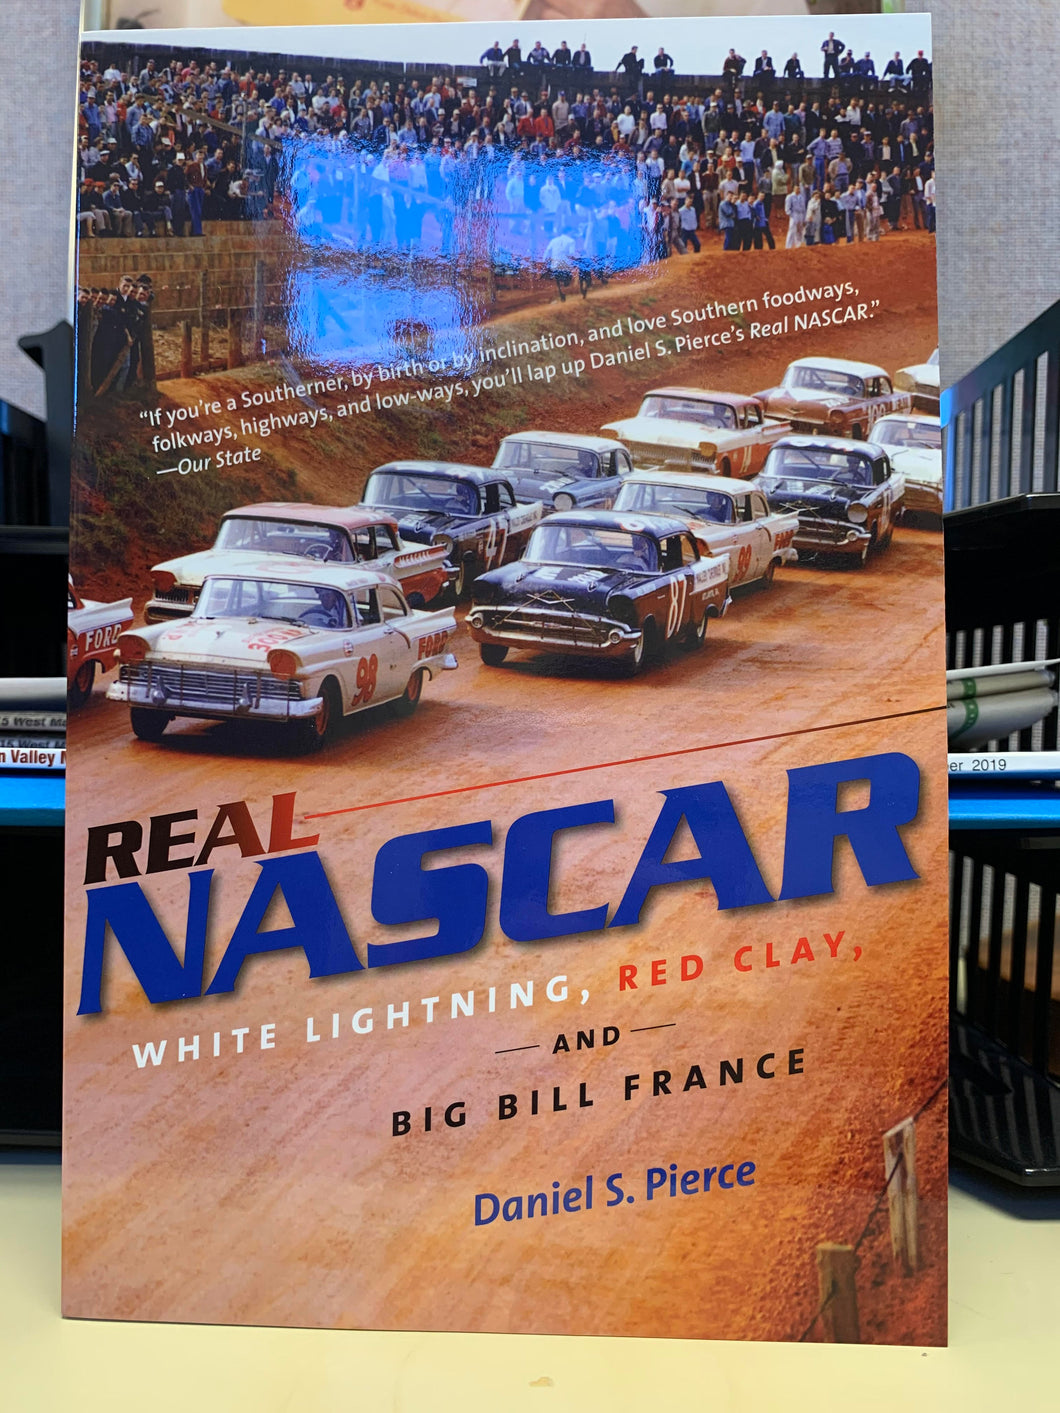 Real NASCAR: White Lightning, Red Clay, and Big Bill France by Daniel S. Pierce